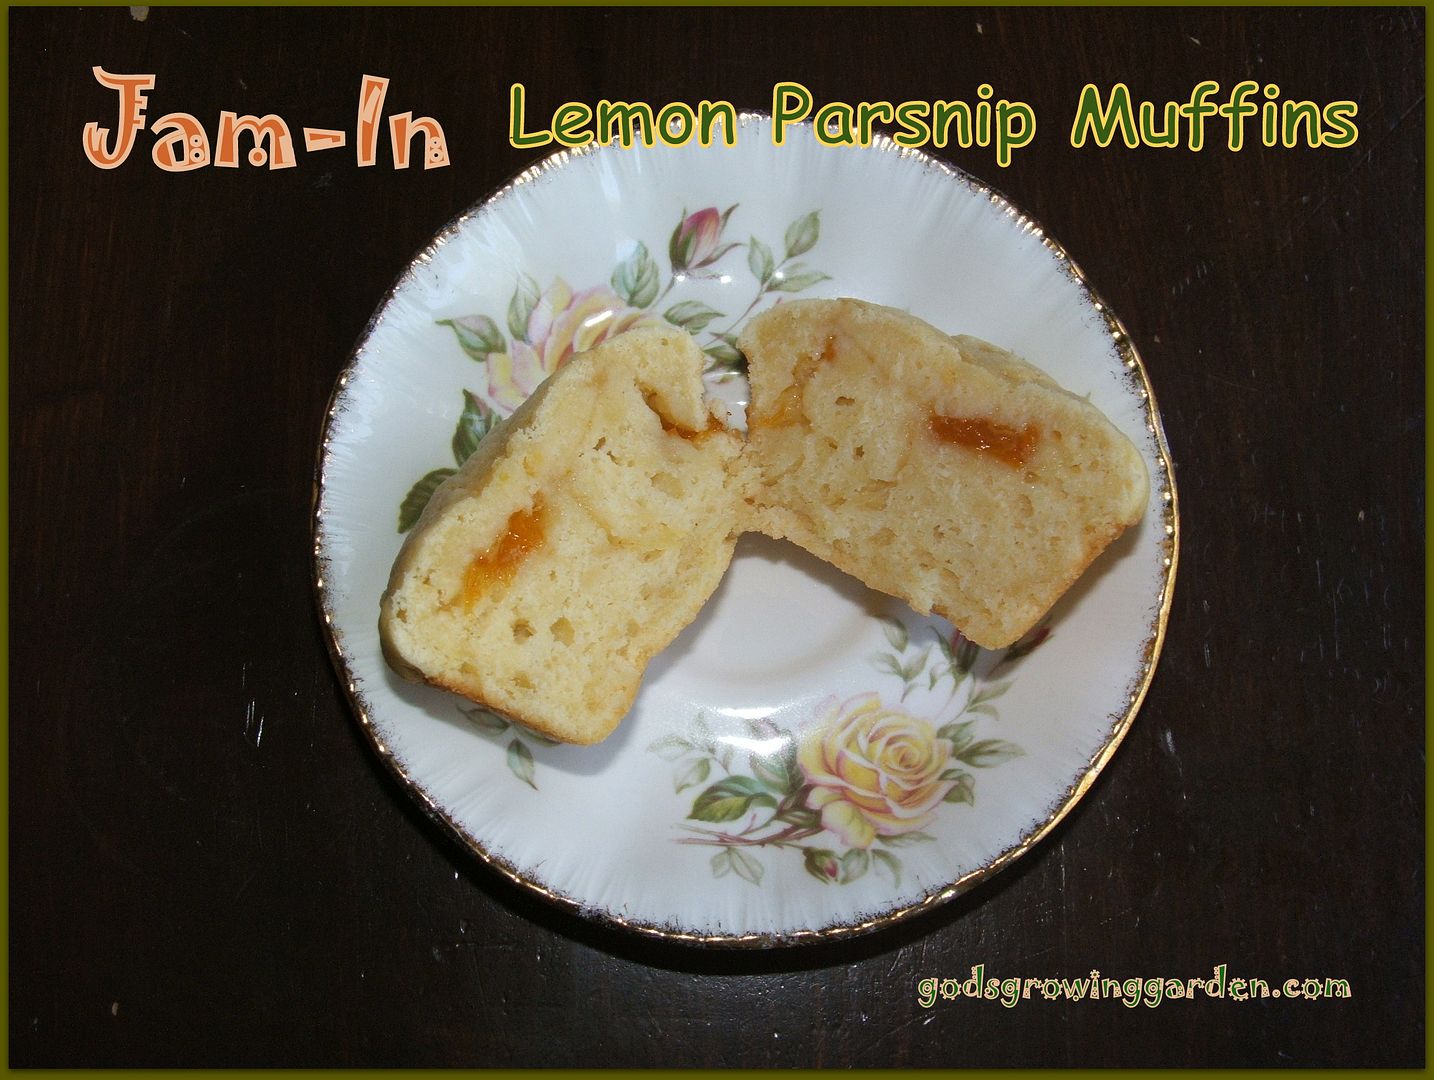 Jam-In Lemon Parsnip Muffins by Angie Ouellette-Tower for godsgrowinggarden.com photo 013_zps0b093e73.jpg